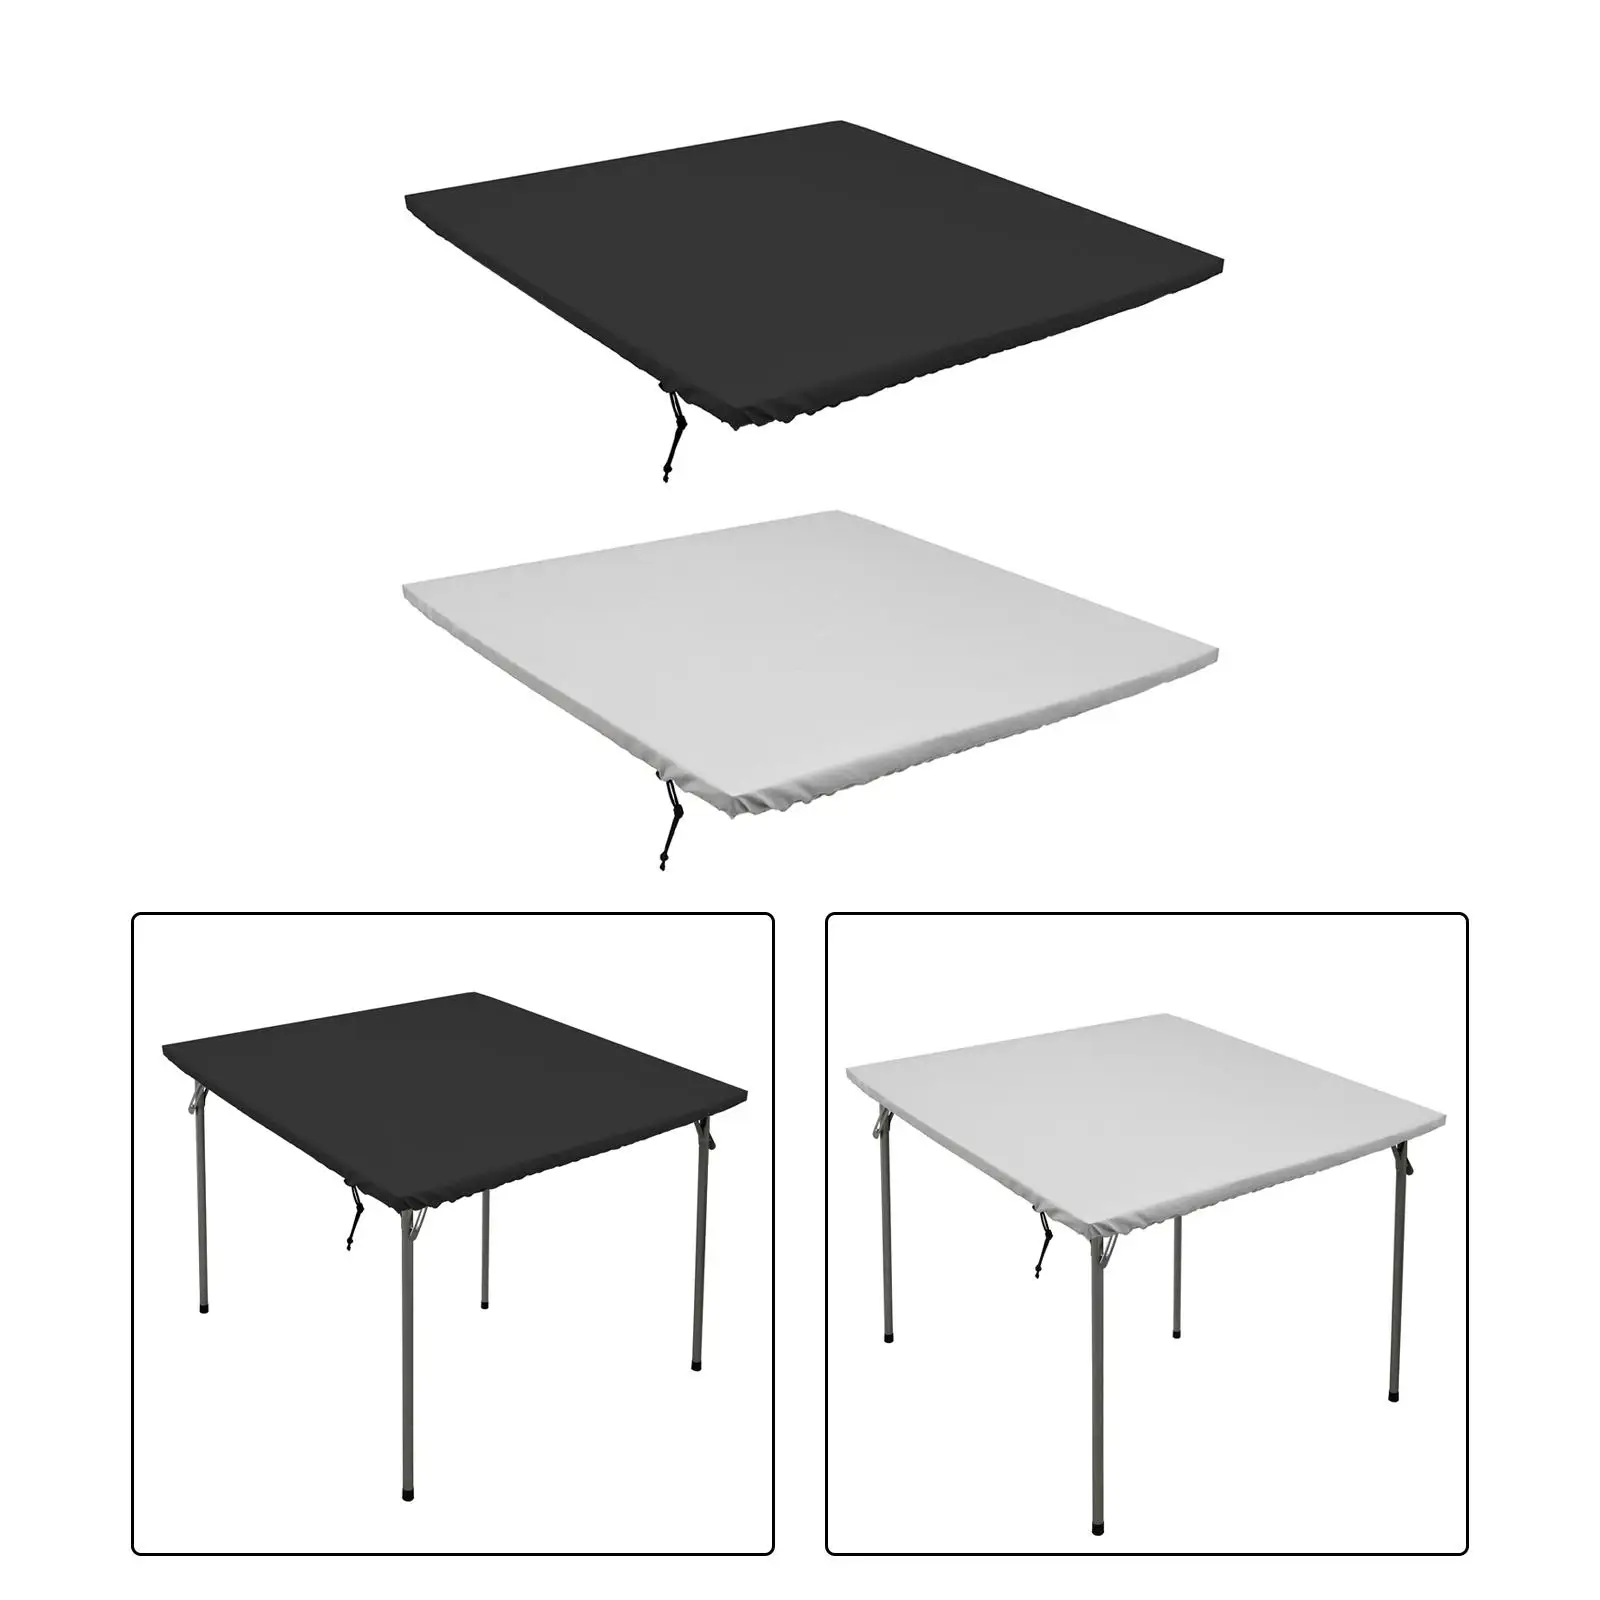 90Cmx90cm Stretchable Table Tablecloth Washable Polyester Square Fitted Table Cover for Picnic Outdoor Dinner Hol Decor